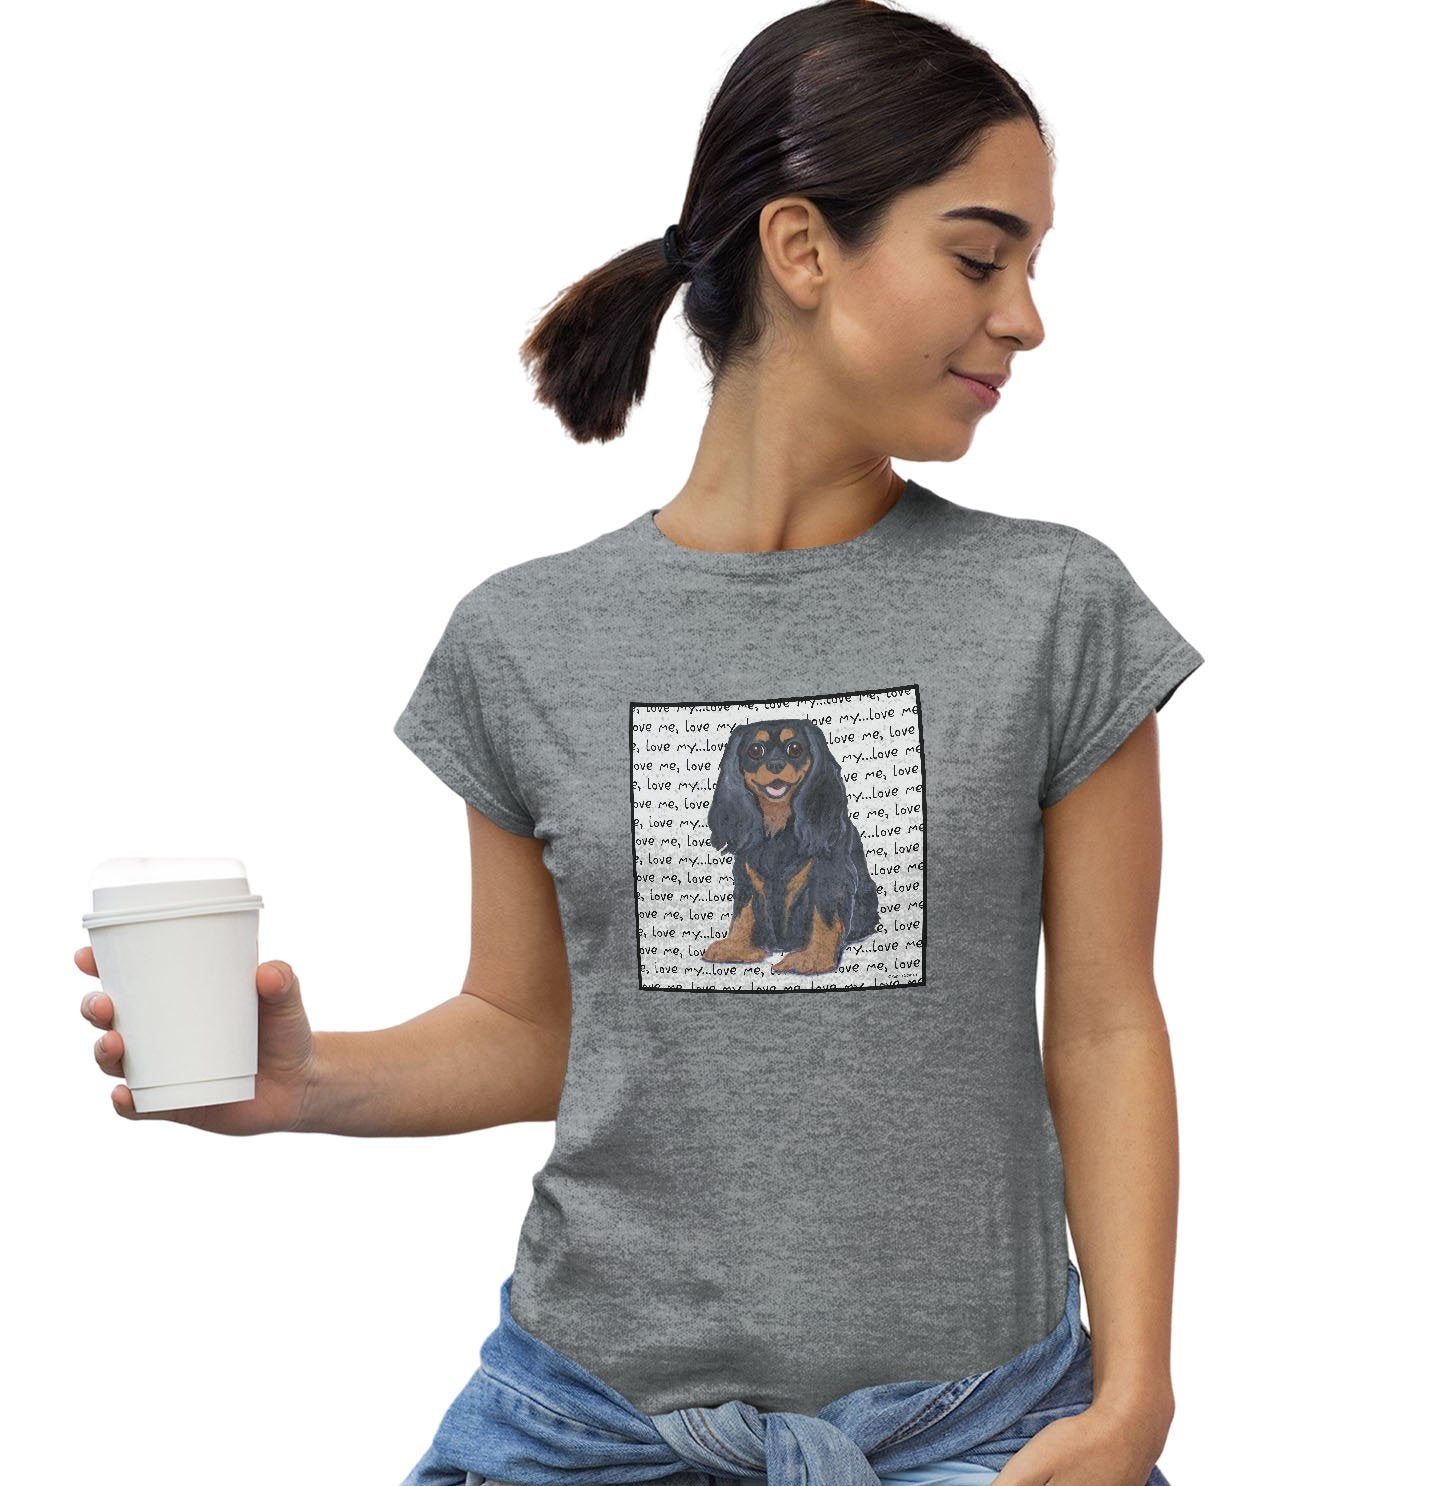 Black & Tan Cavalier Love Text - Women's Fitted T-Shirt